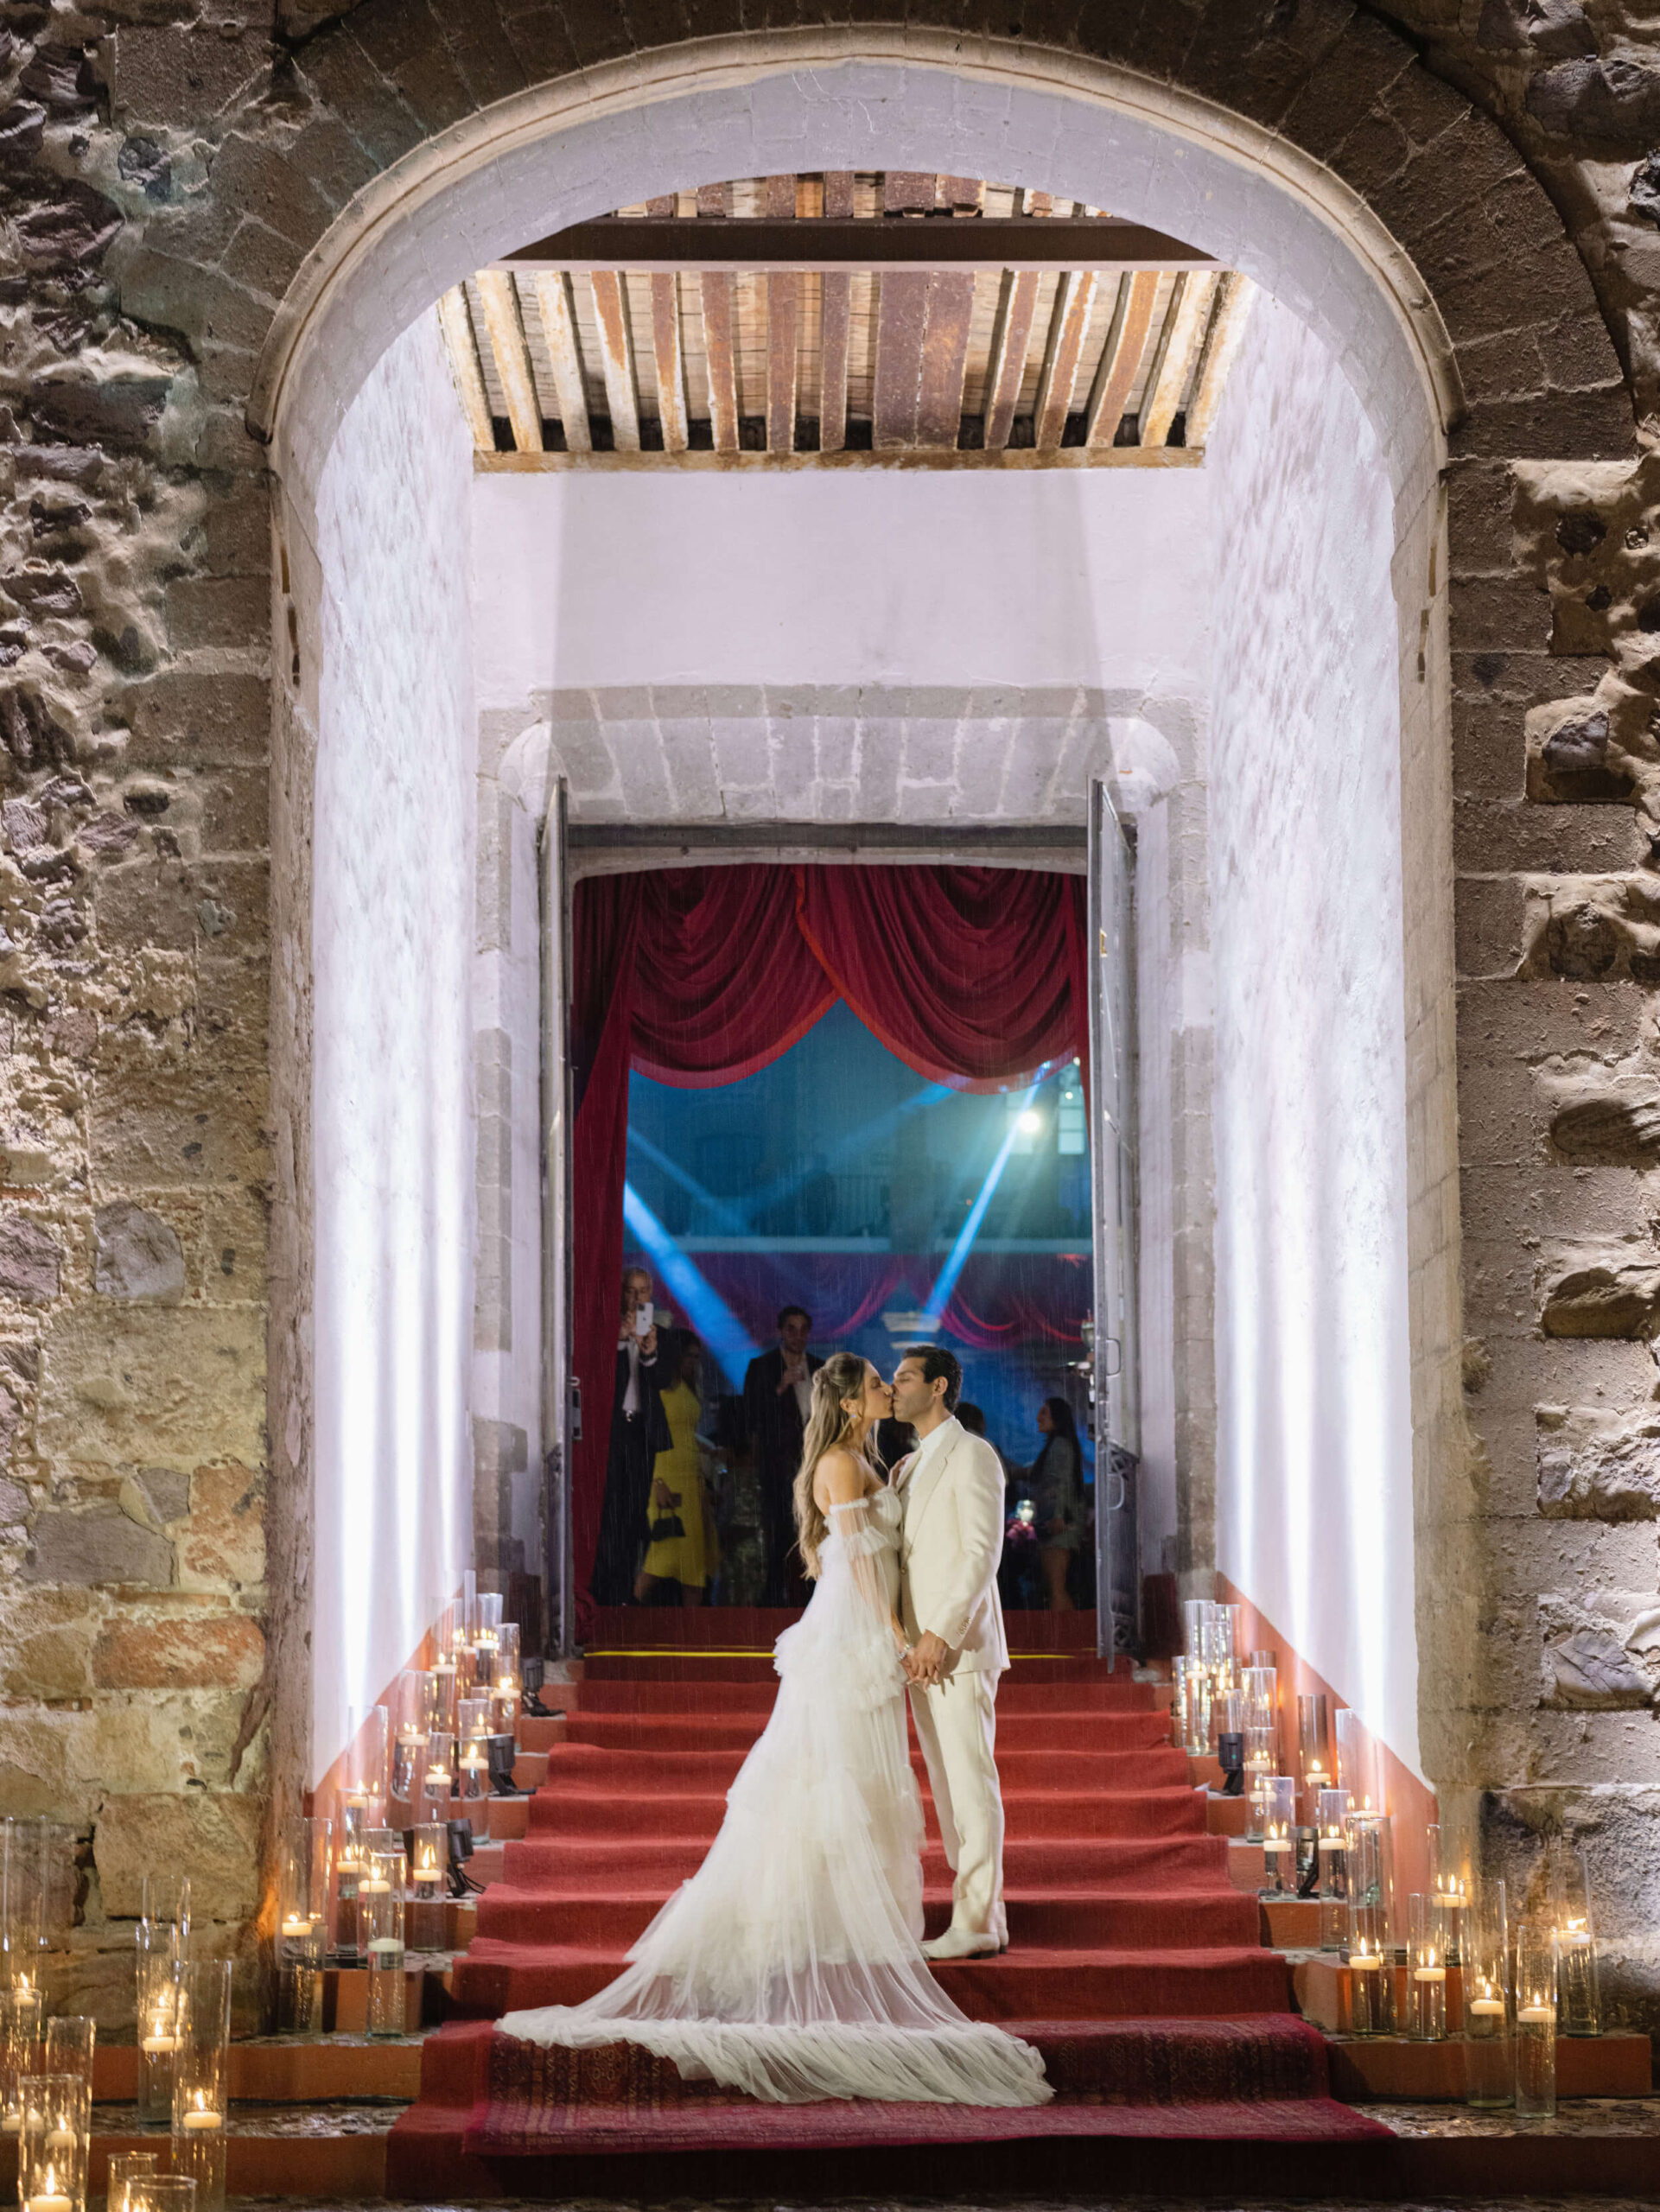 Ashley and Brian kissing in the stone archway of the entrance to their welcome party